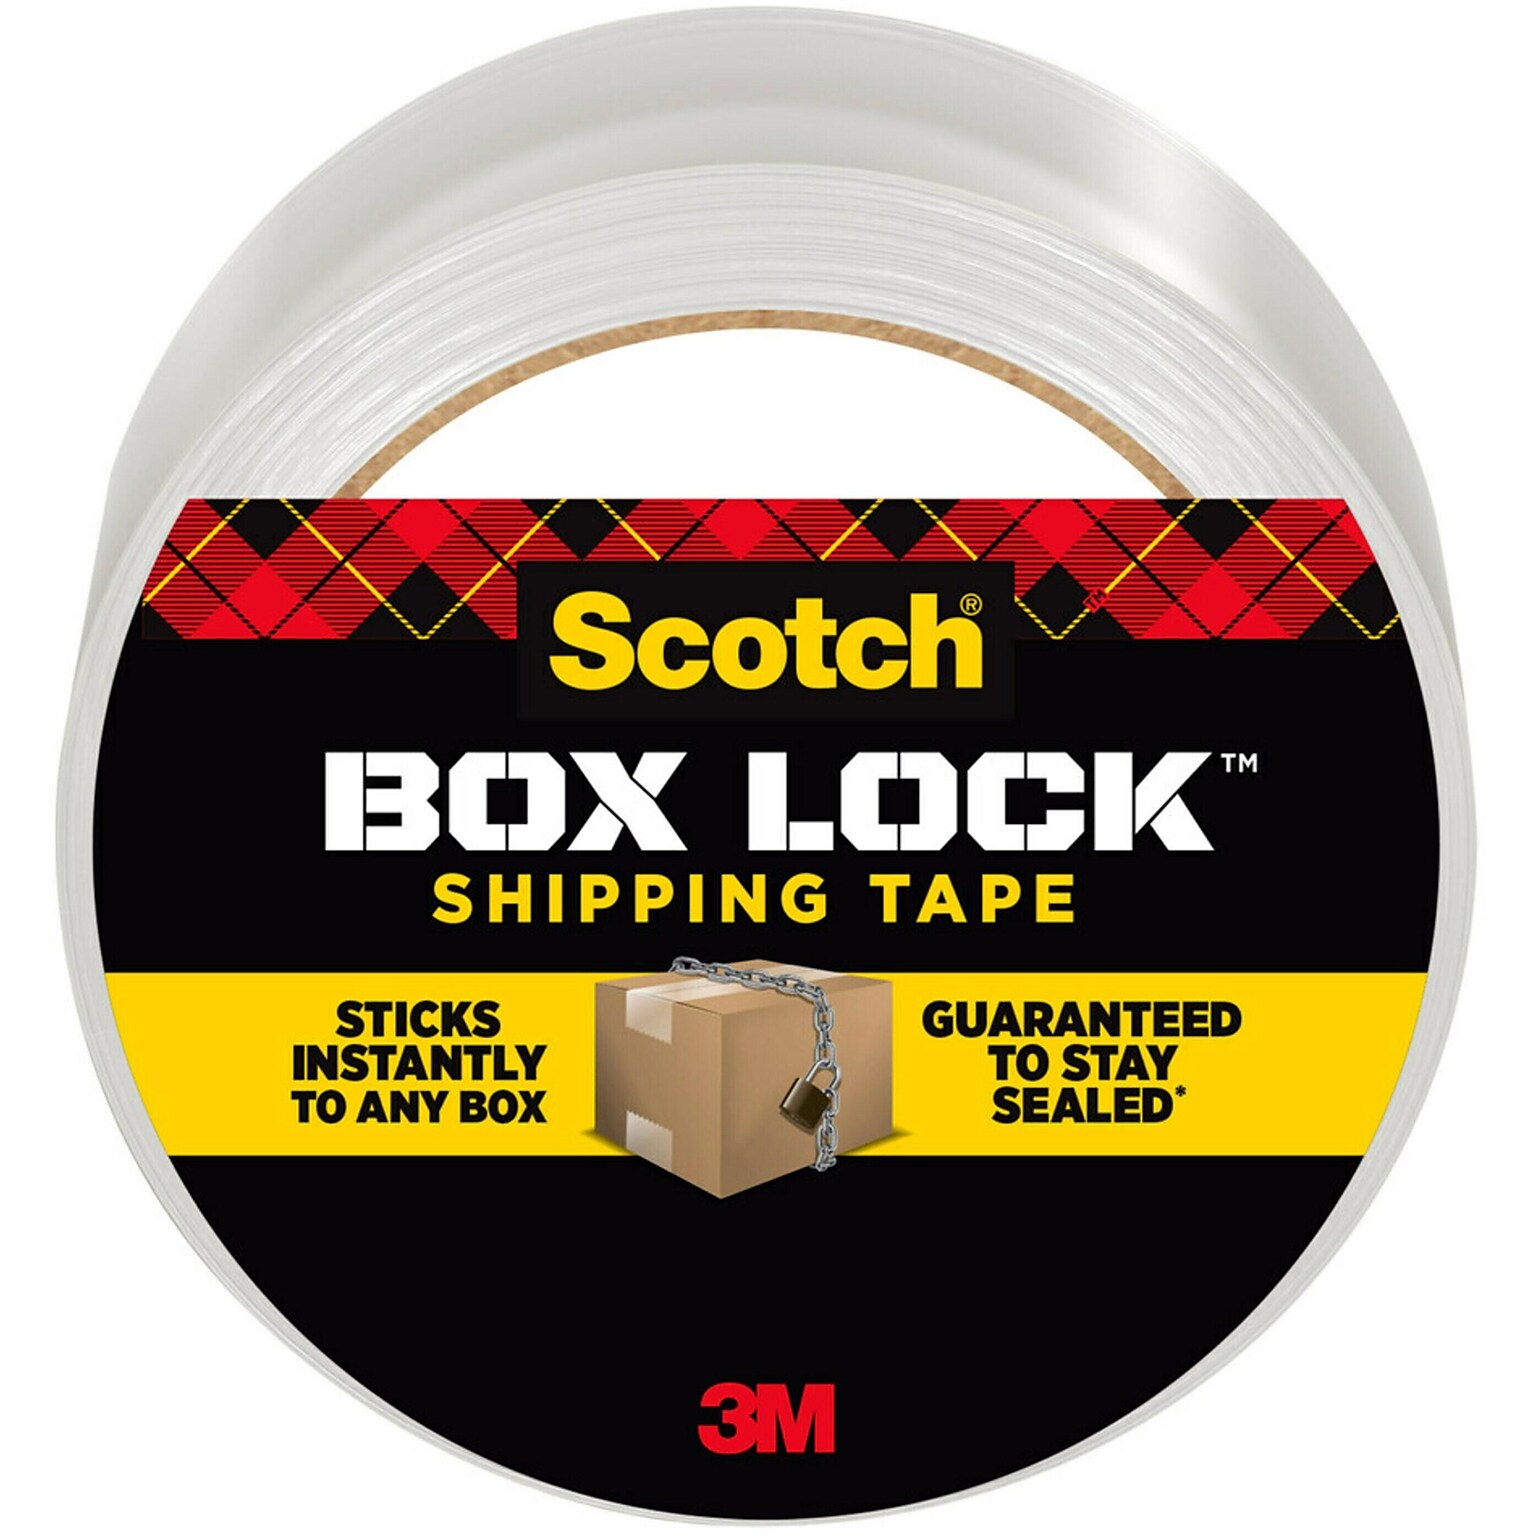 Scotch Box Lock Shipping Packing Tape, 1.88 in x 54.6 yds., Clear (3950)